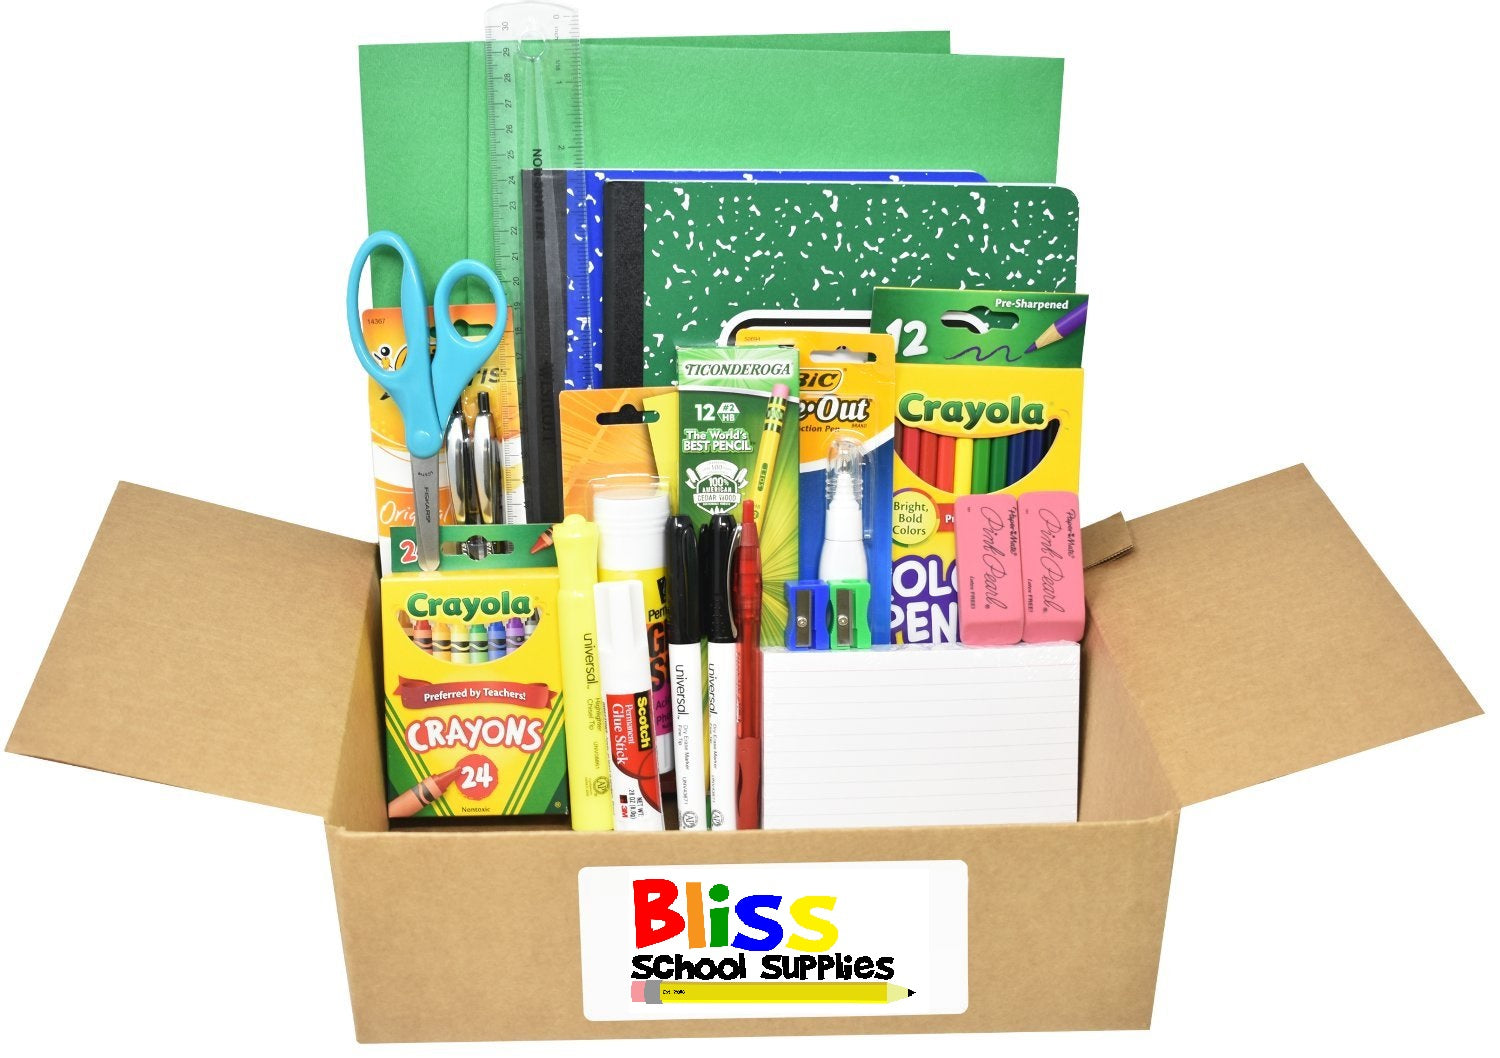 Cute Back-to-School Supplies for Kids - This is our Bliss